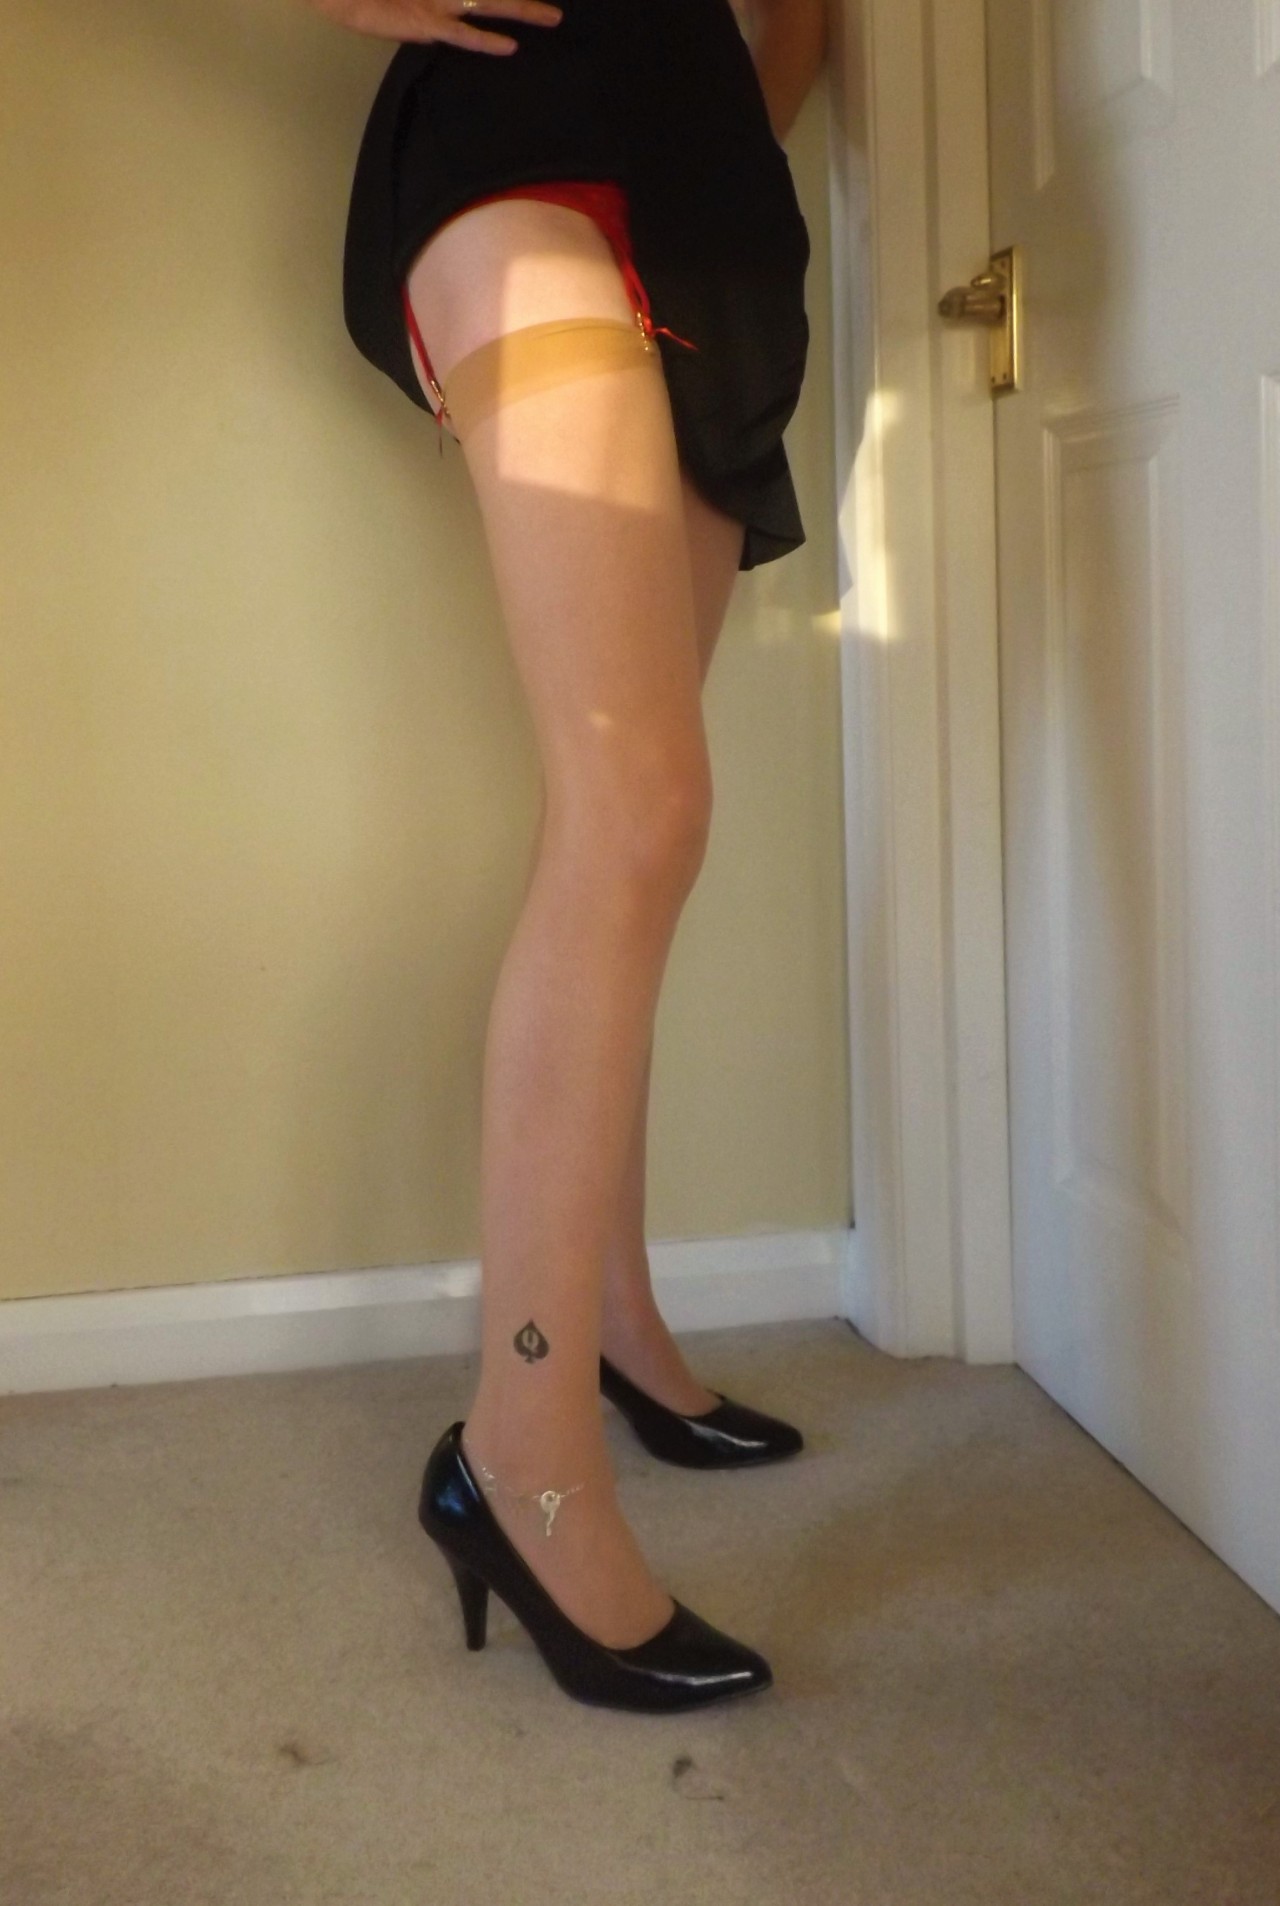 sexy-jewels:
“ sexy-jewels:
“ Wife ready to go out on her date with her black stud boyfriend
”
Hotwife, sissy cuckold and femdom keyholder anklets available from:
http://www.sexyjewels.co.uk/store/index.php?page=euro-style-anklets
with worldwide...